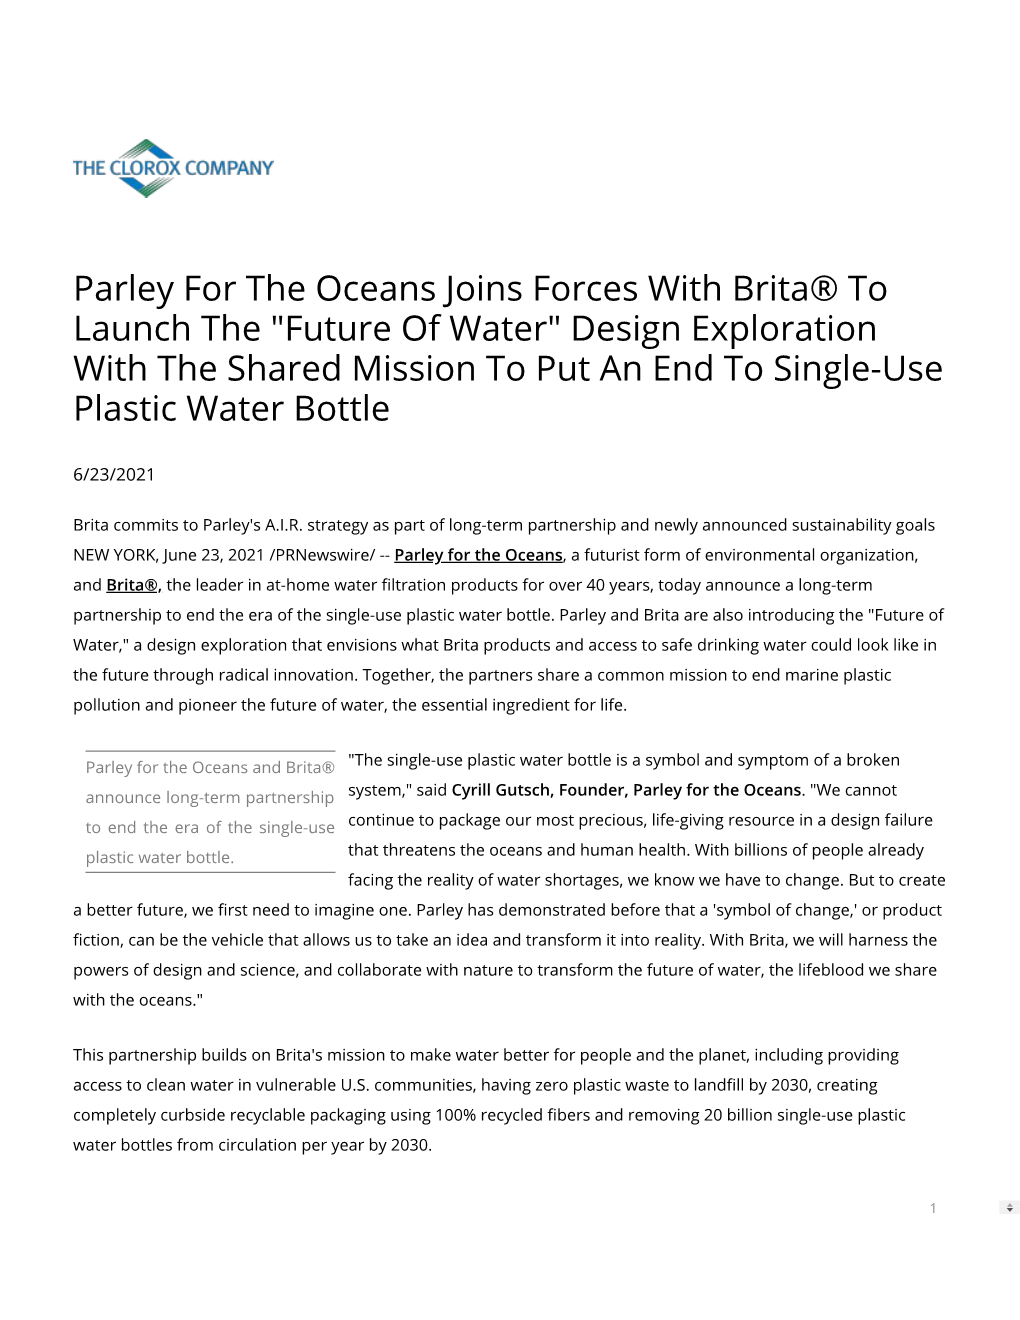 Parley for the Oceans Joins Forces with Brita® to Launch the "Future